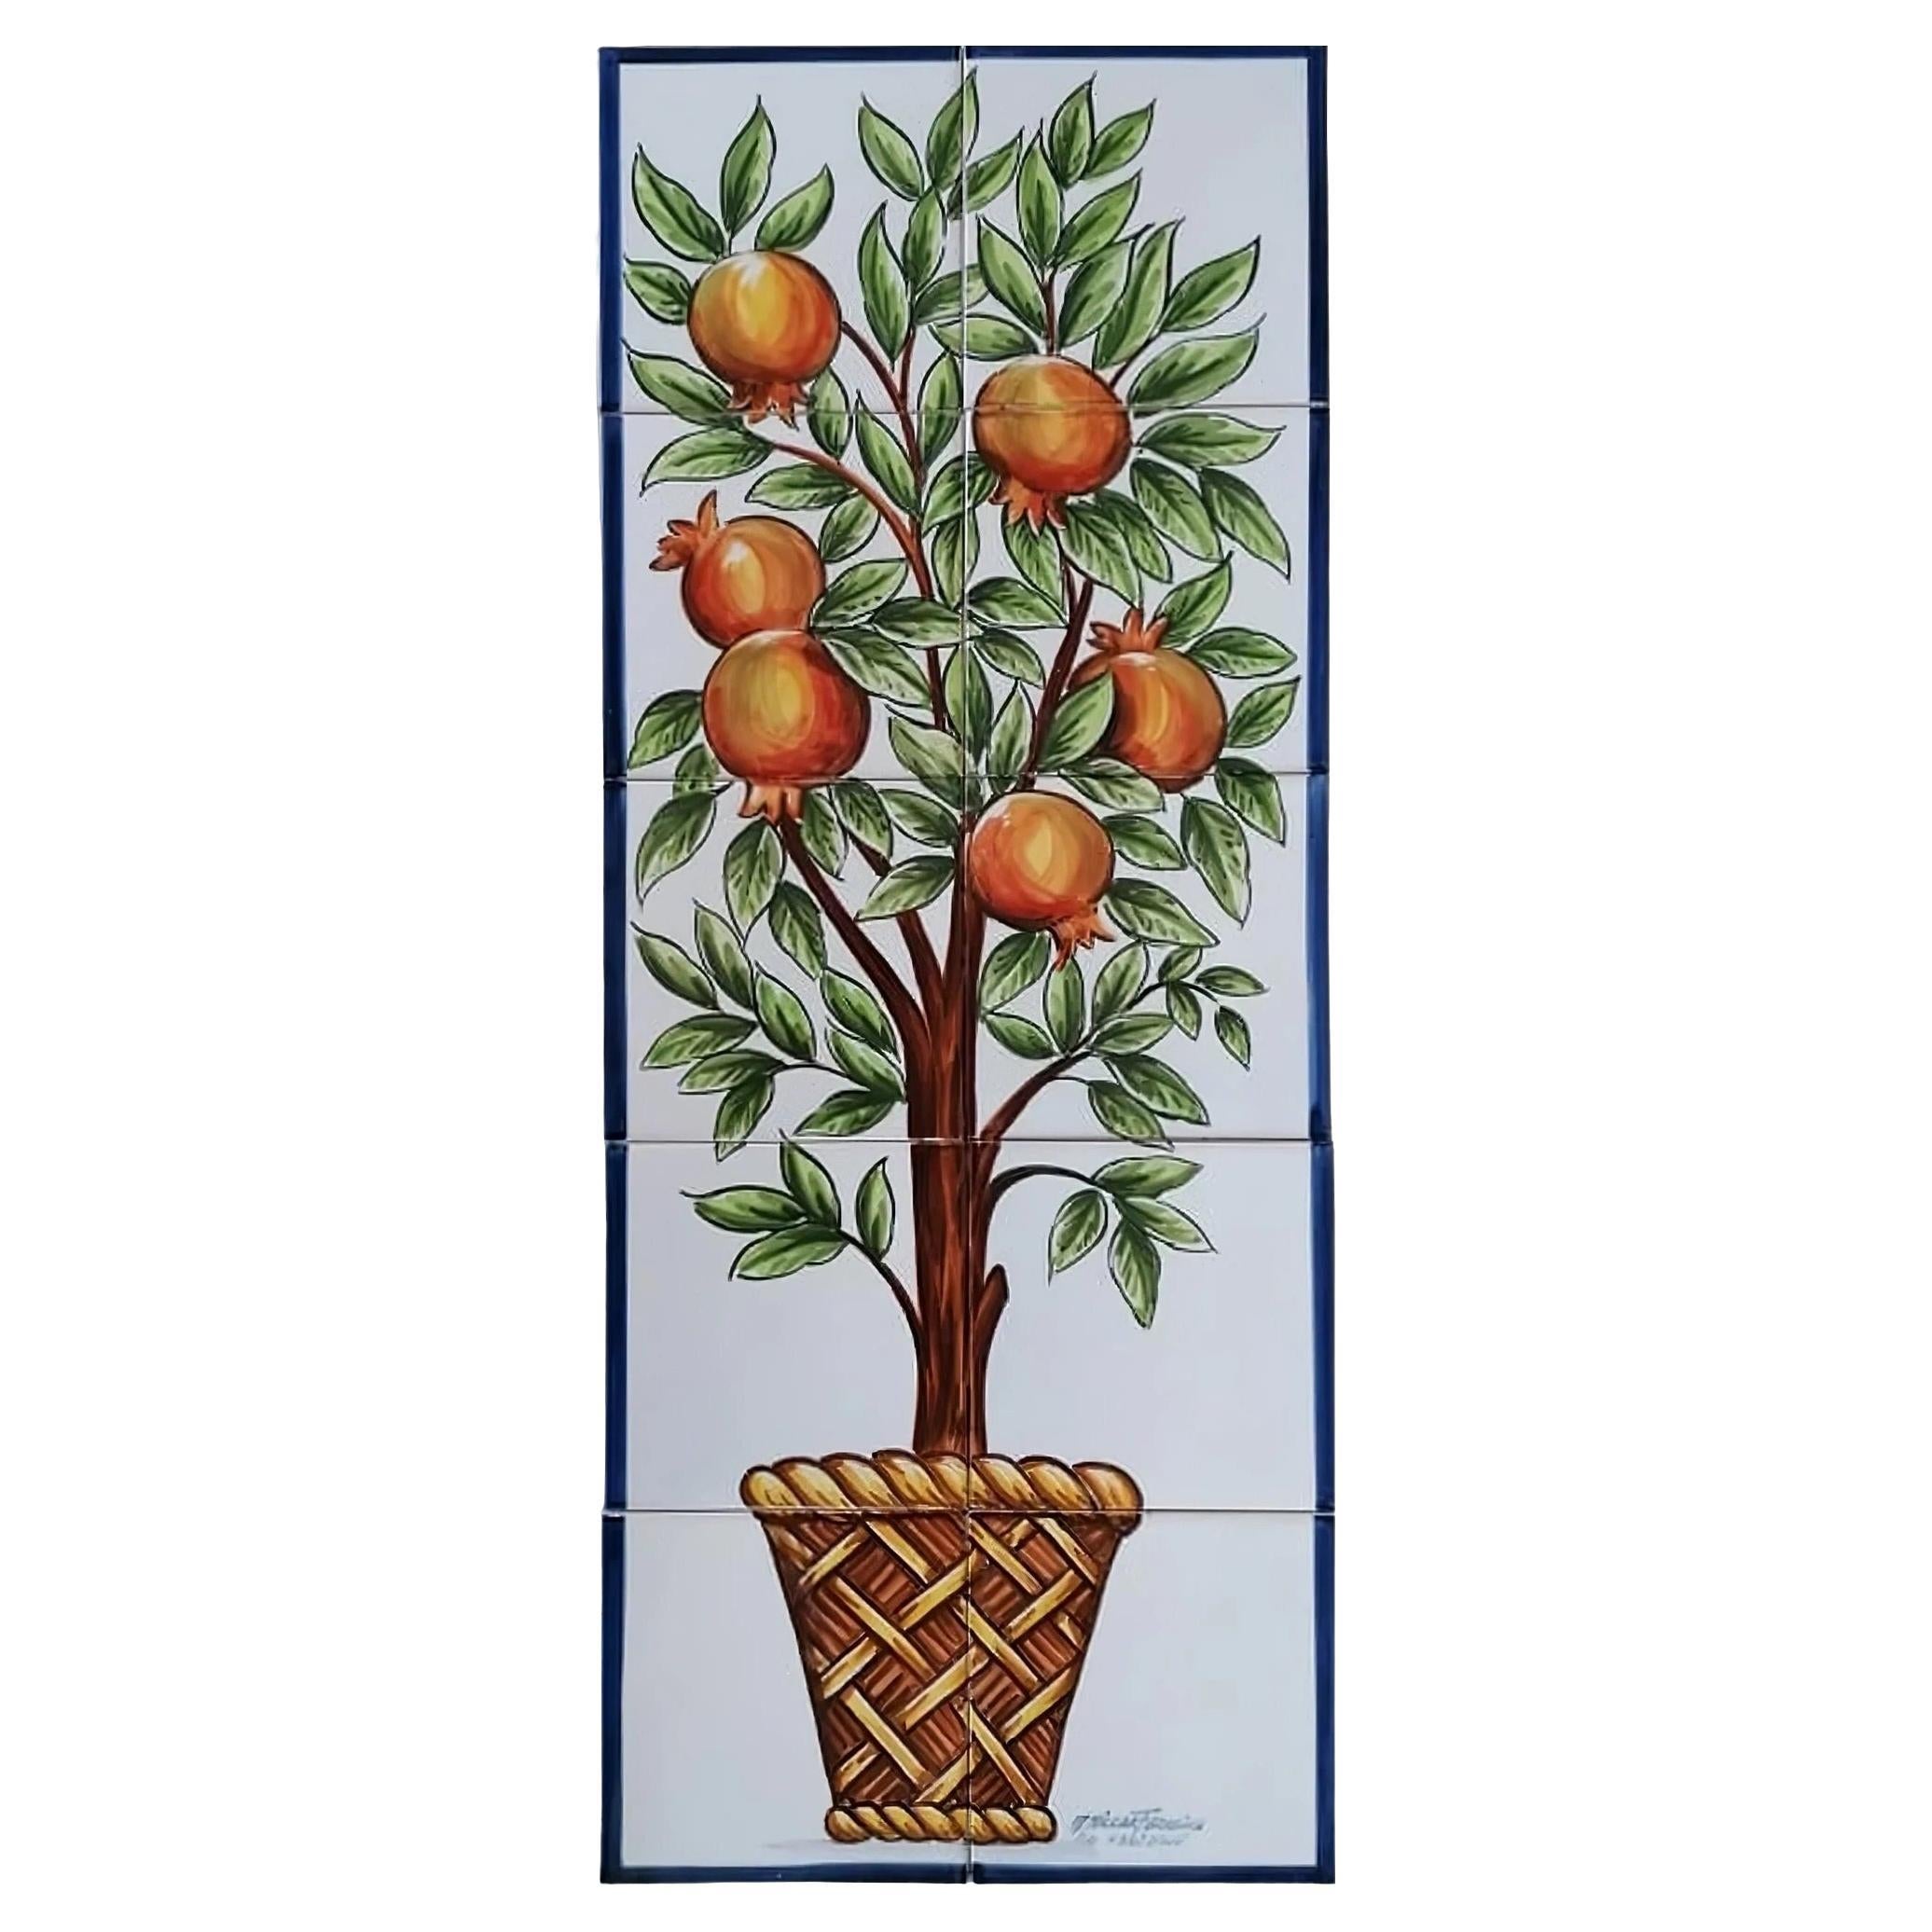 Azulejos Portuguese Hand Painted Tile Mural "Pomegranate Tree" Signed by Artist